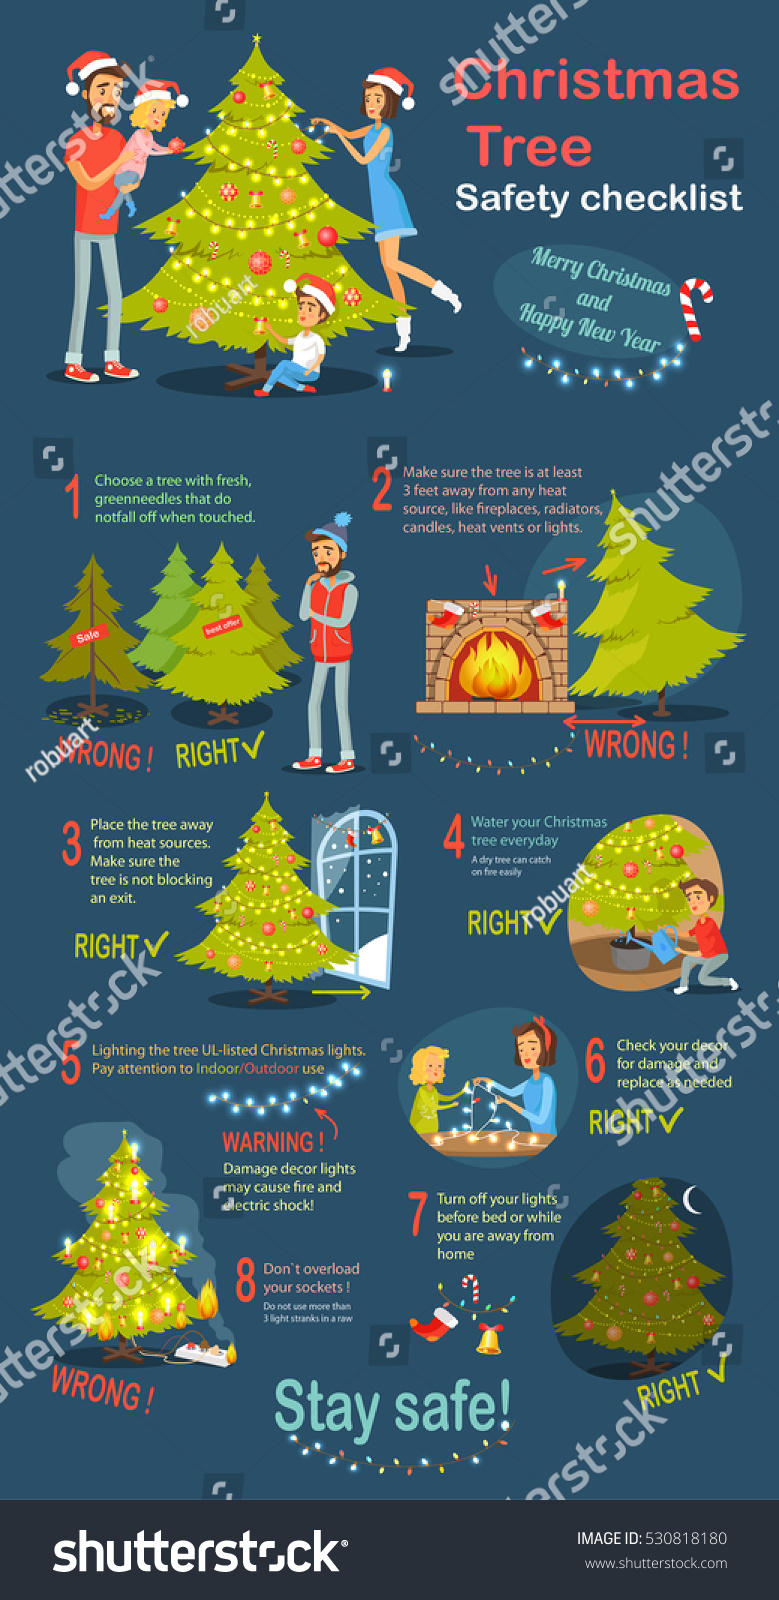 Christmas tree safety cheklist Merry Christmas and happy New Year Instructions how to deel